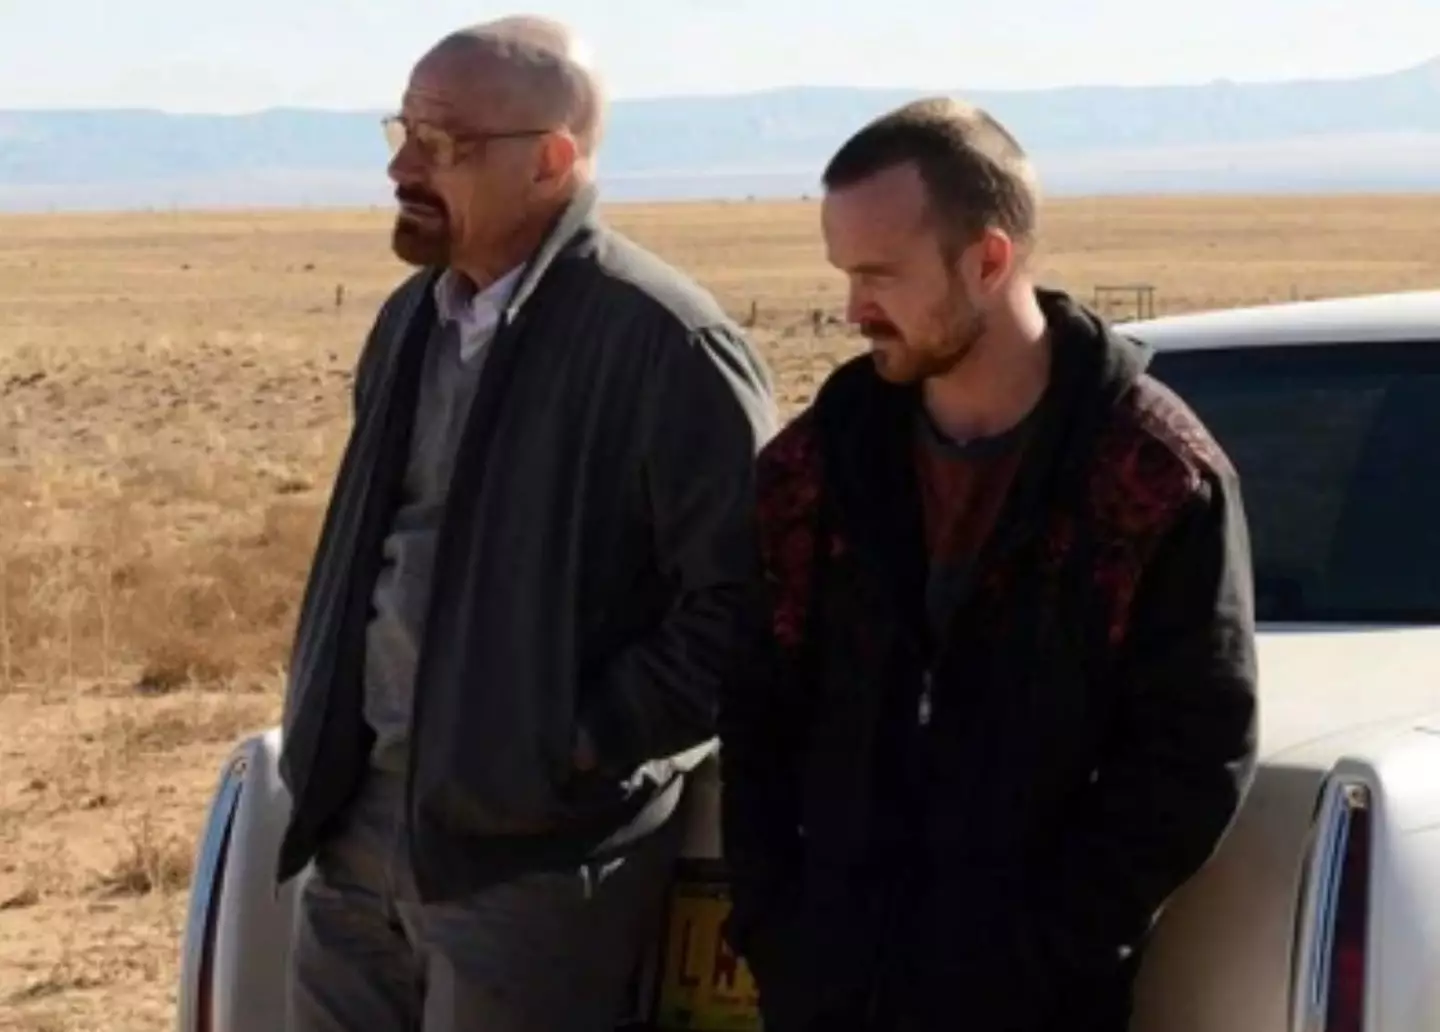 A date has been set for Breaking Bad to leave Netflix.